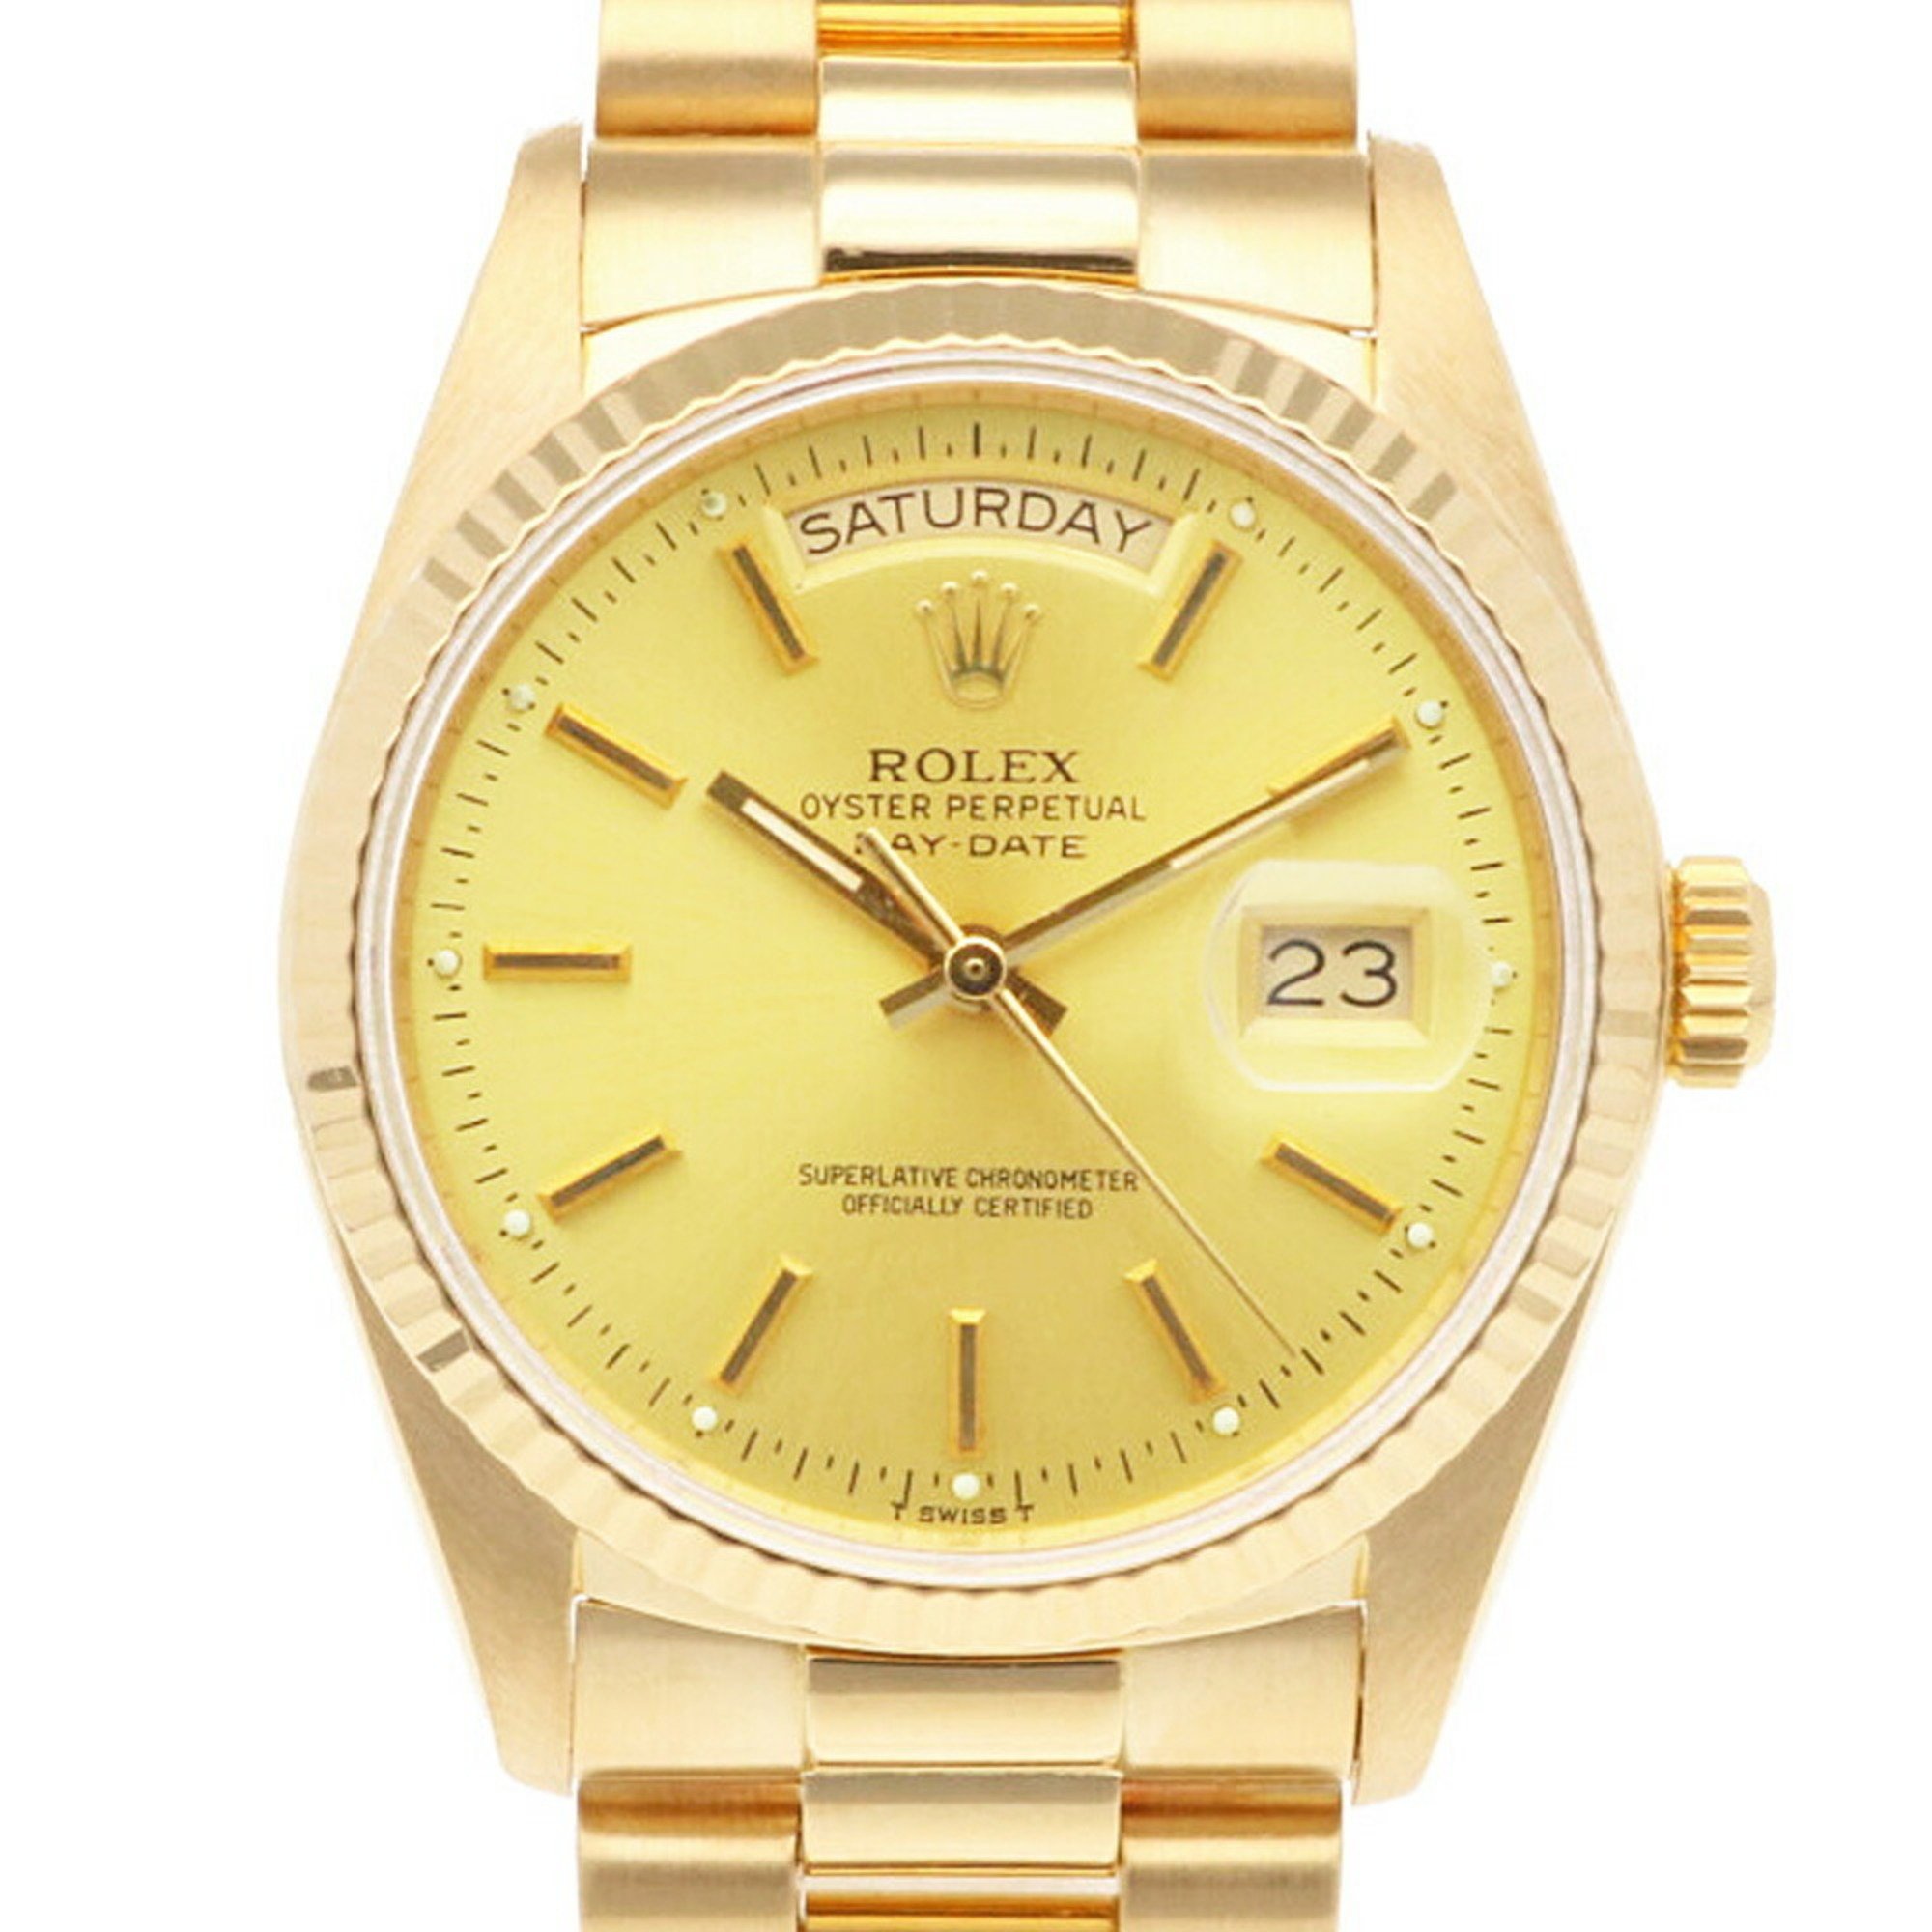 Rolex Day-Date Oyster Perpetual Watch 18K 18038 Automatic Men's ROLEX No. 89 1985 Model Overhauled